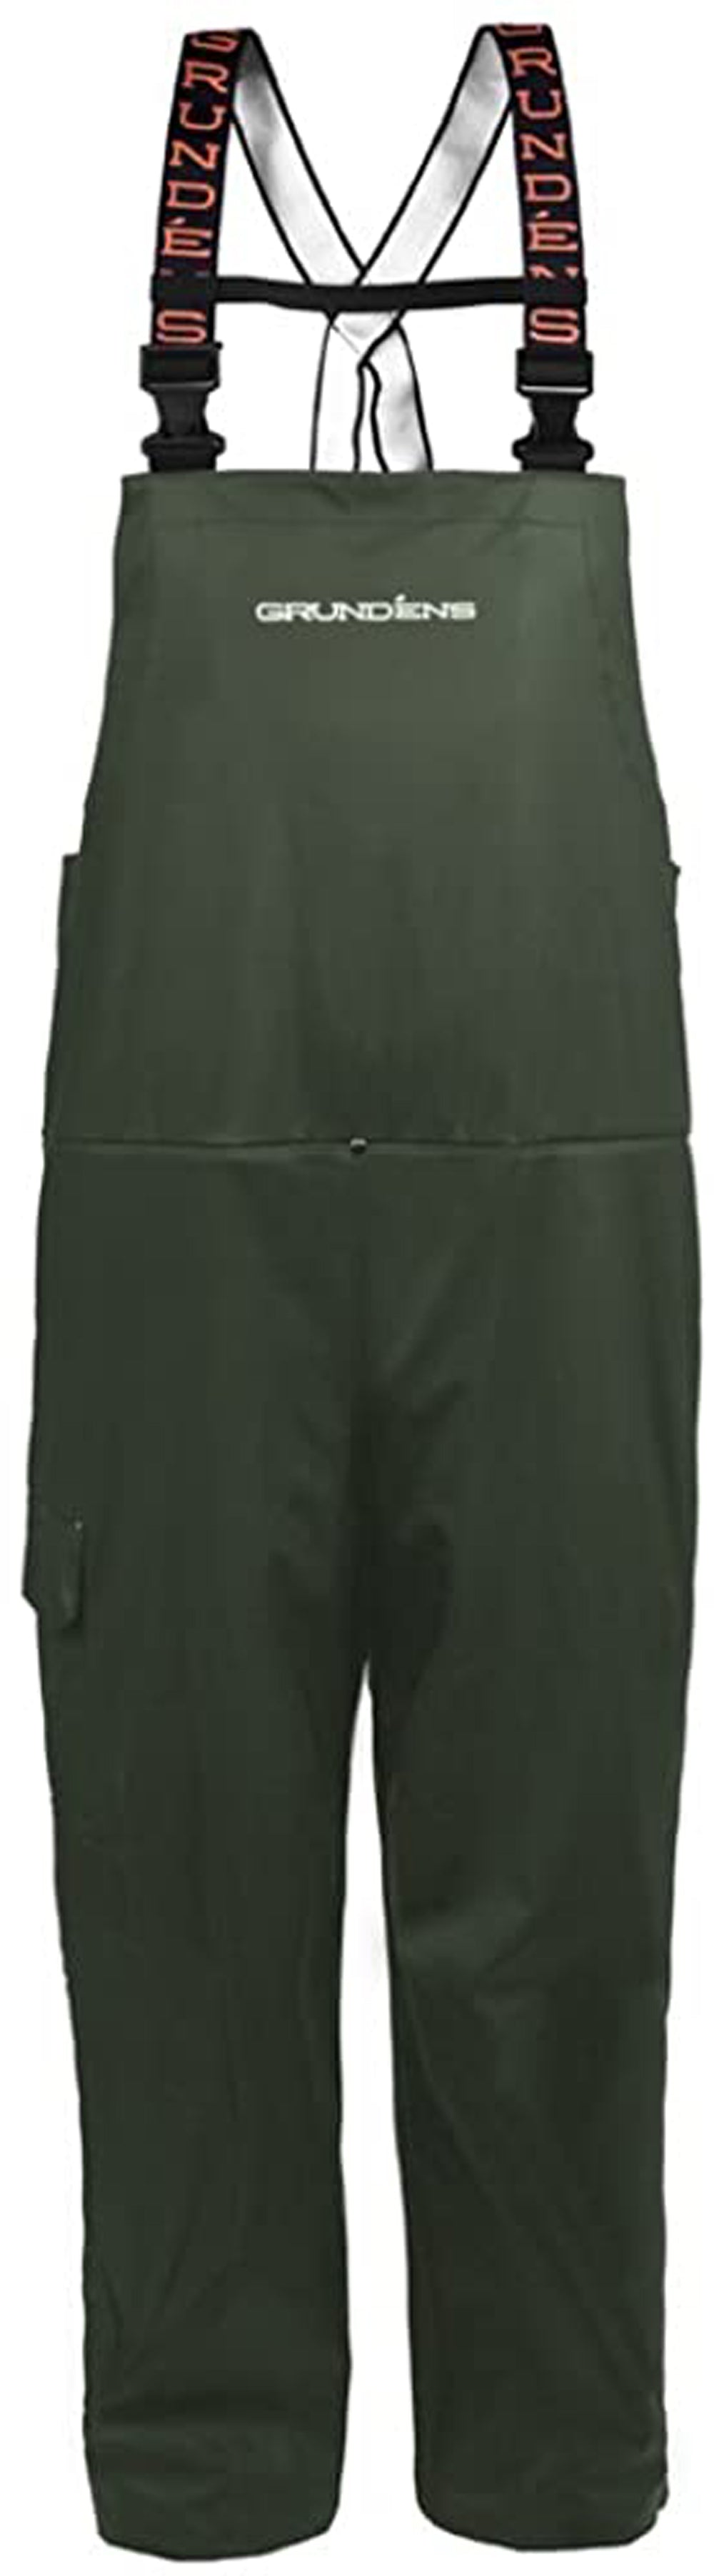 Neptune Bib in Green color from the front view